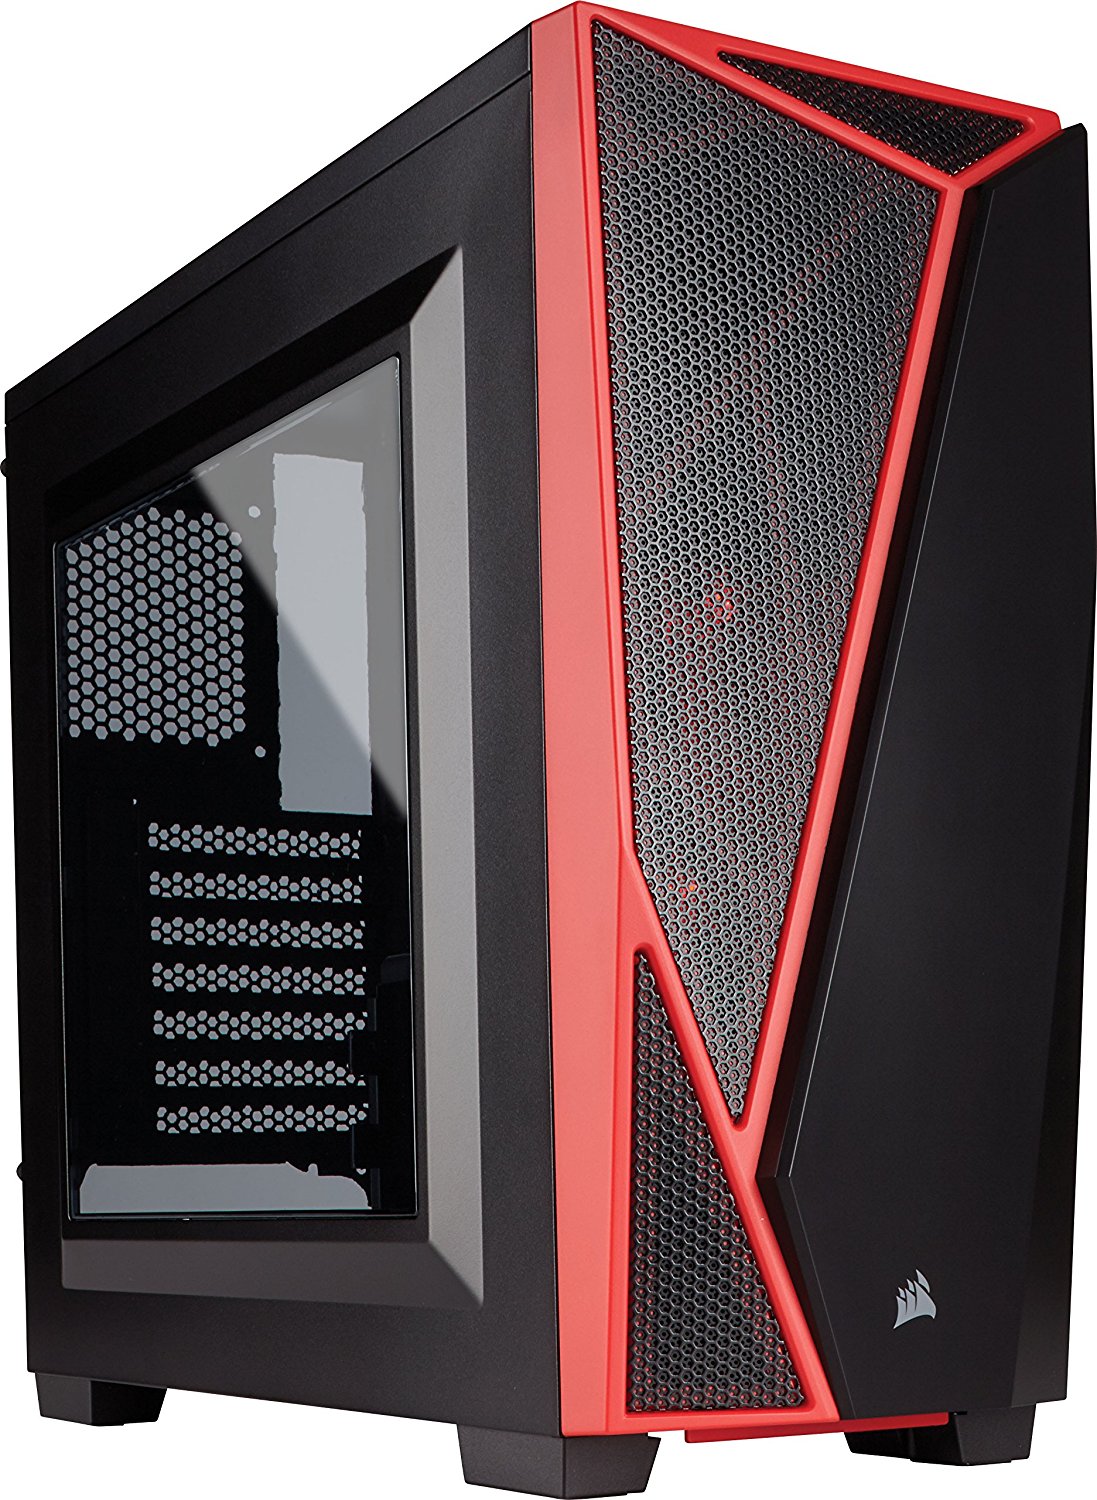 Corsair CC-9011107-WW Carbide Series SPEC-04 Steel Red LED Mid-Tower Gaming Case (Black)